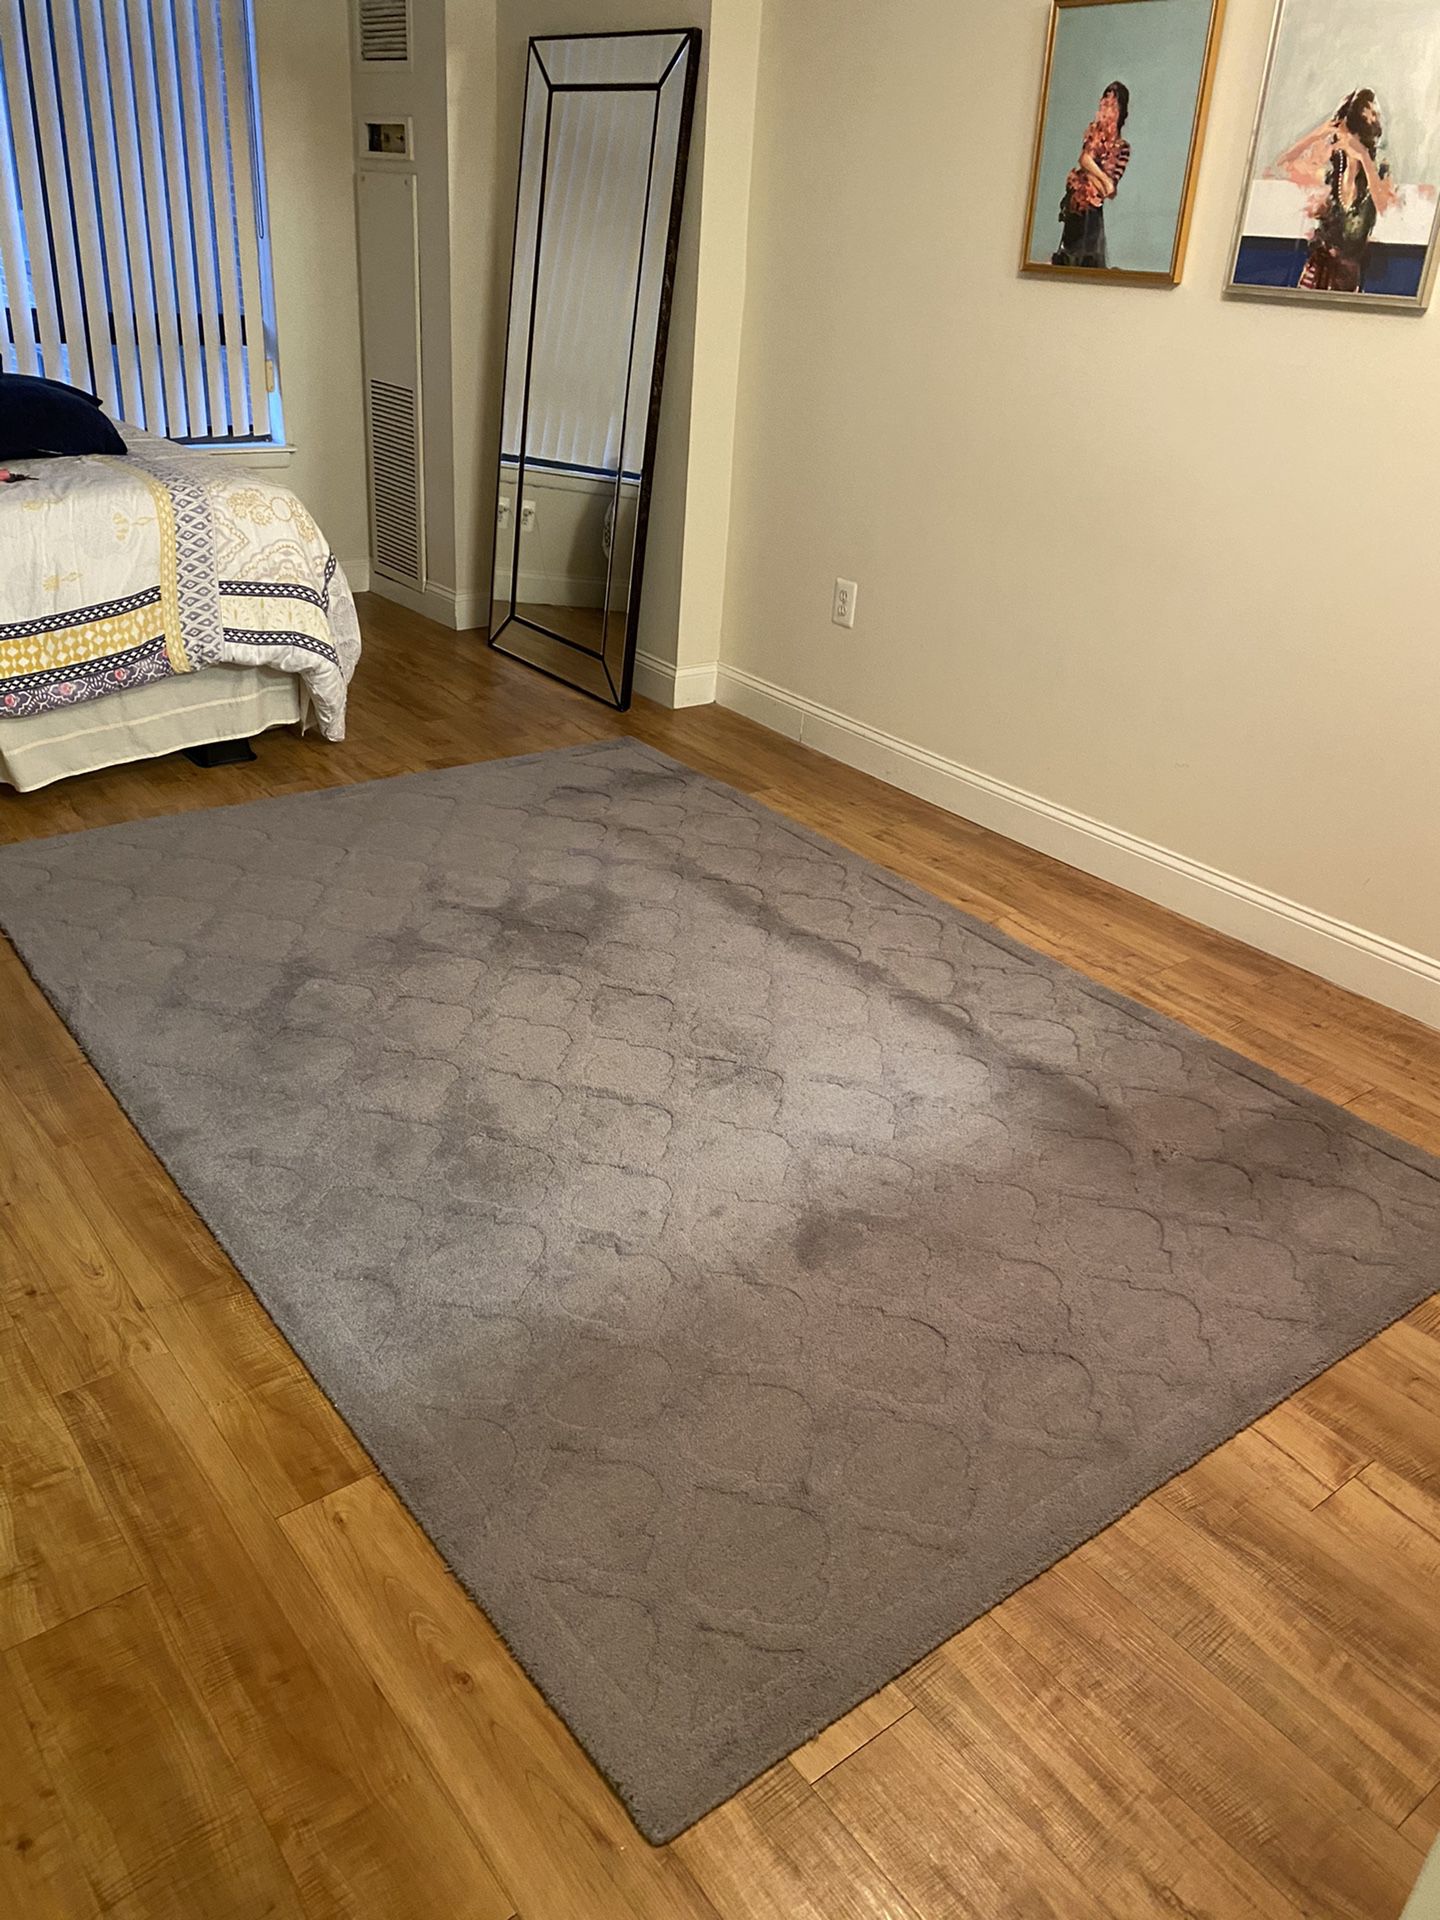 Pier 1 Area Rug with Free Runner